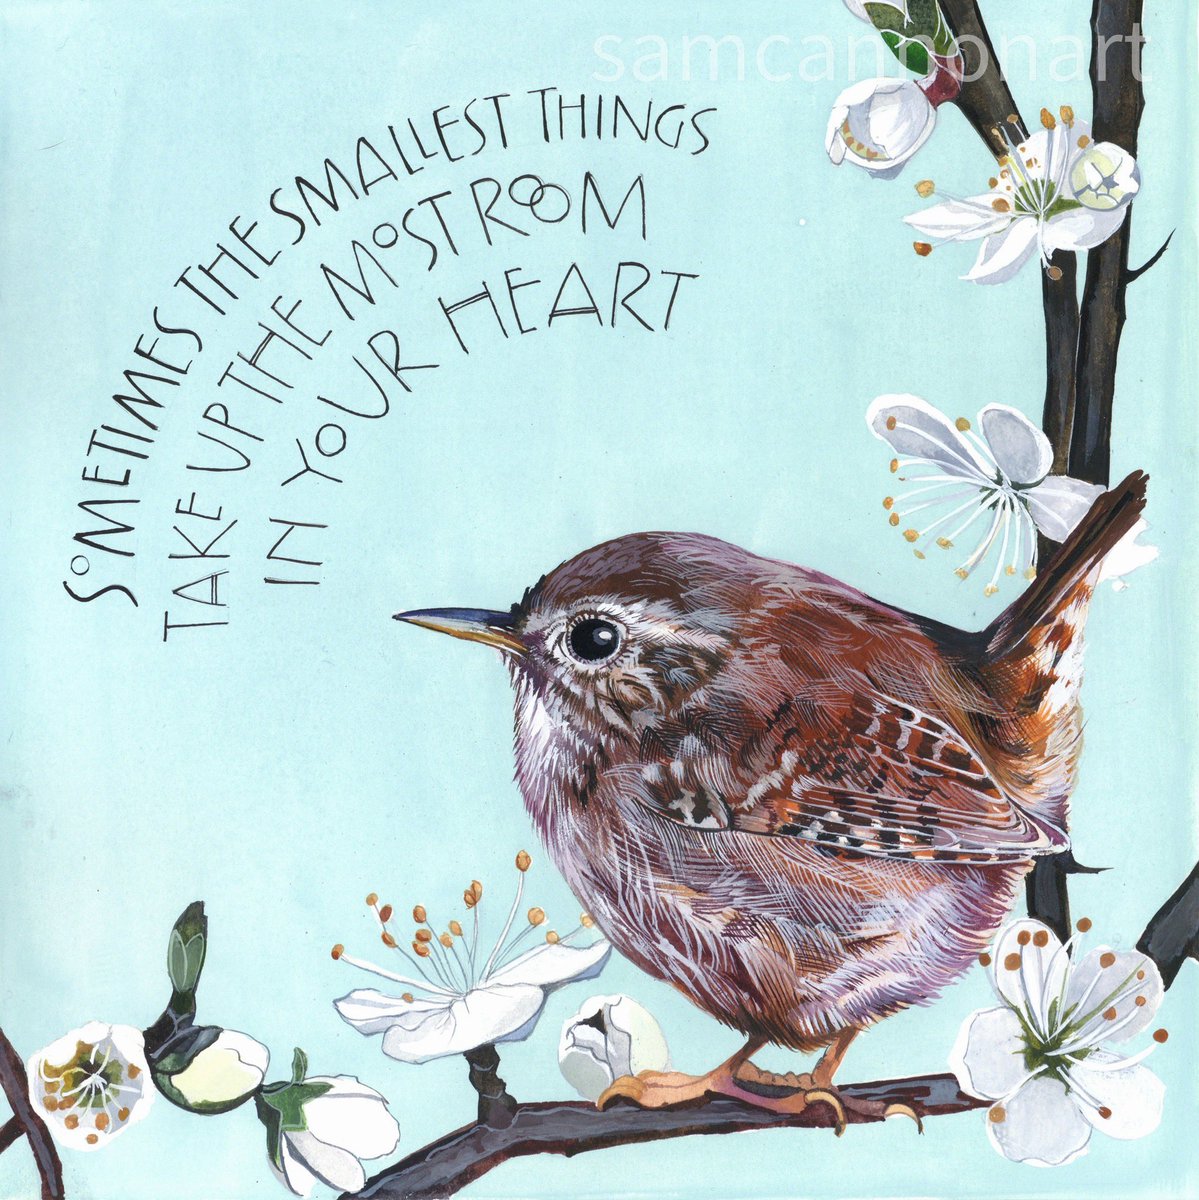 I’m away from my computer right now so can’t search though the archives for something new to show you. But here’s my current favourite, the gorgeous Jenny Wren amongst the Blackthorn blossom with words by A A Milne. I love these tiny birds. Full of song and joy.